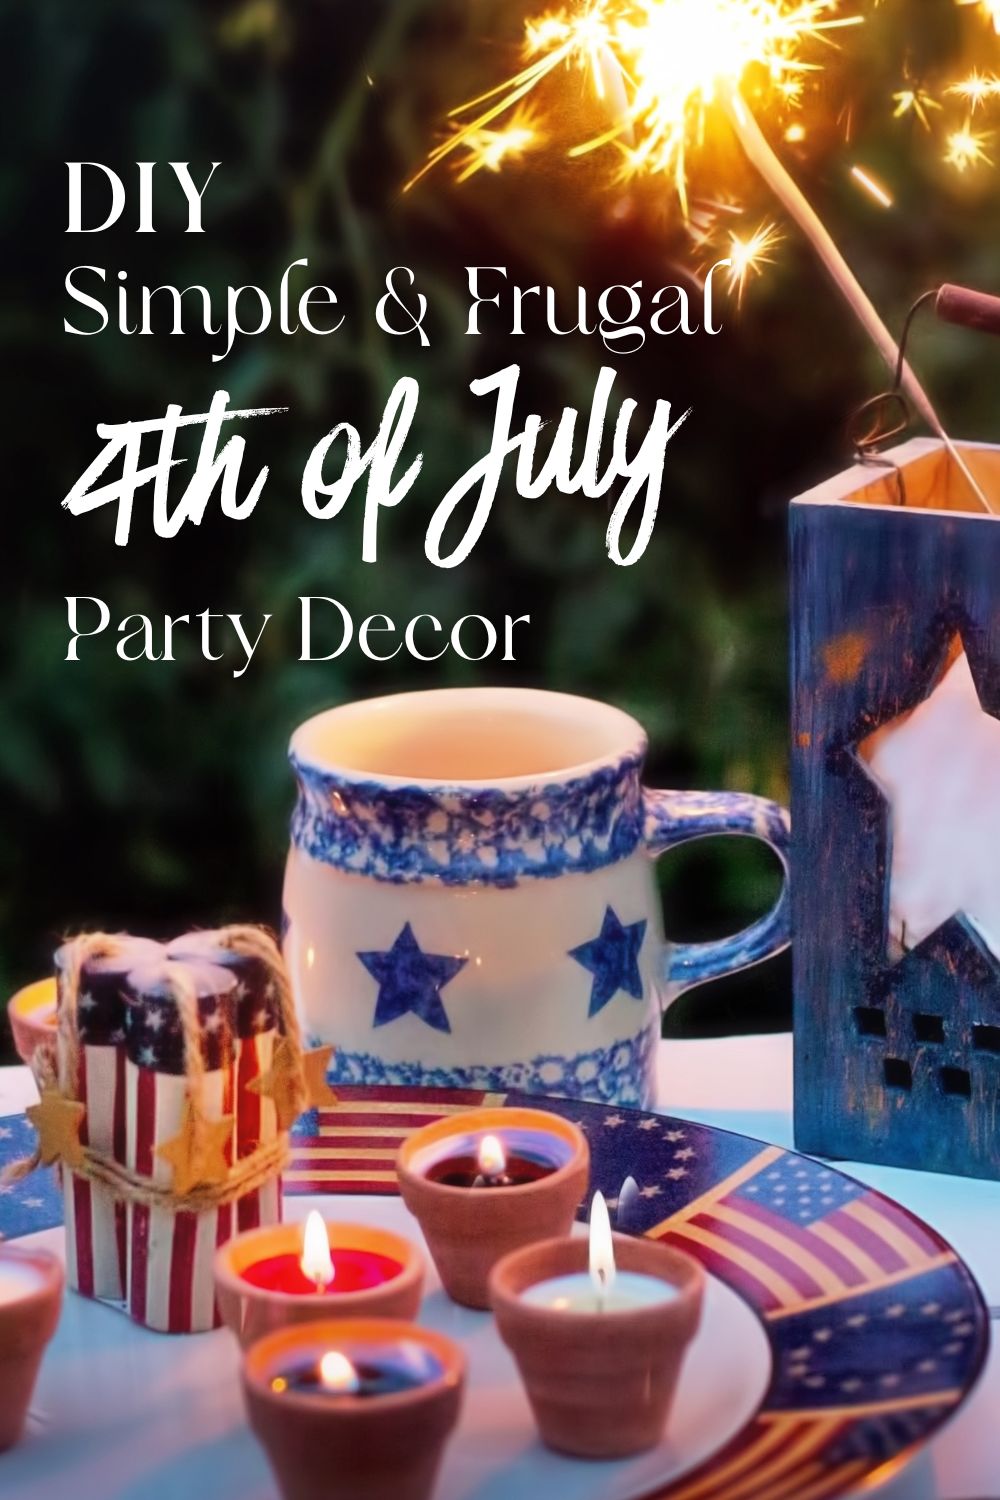 If you’re hosting a 4th of July party, here are some simple and frugal DIY party decorations for you to make.